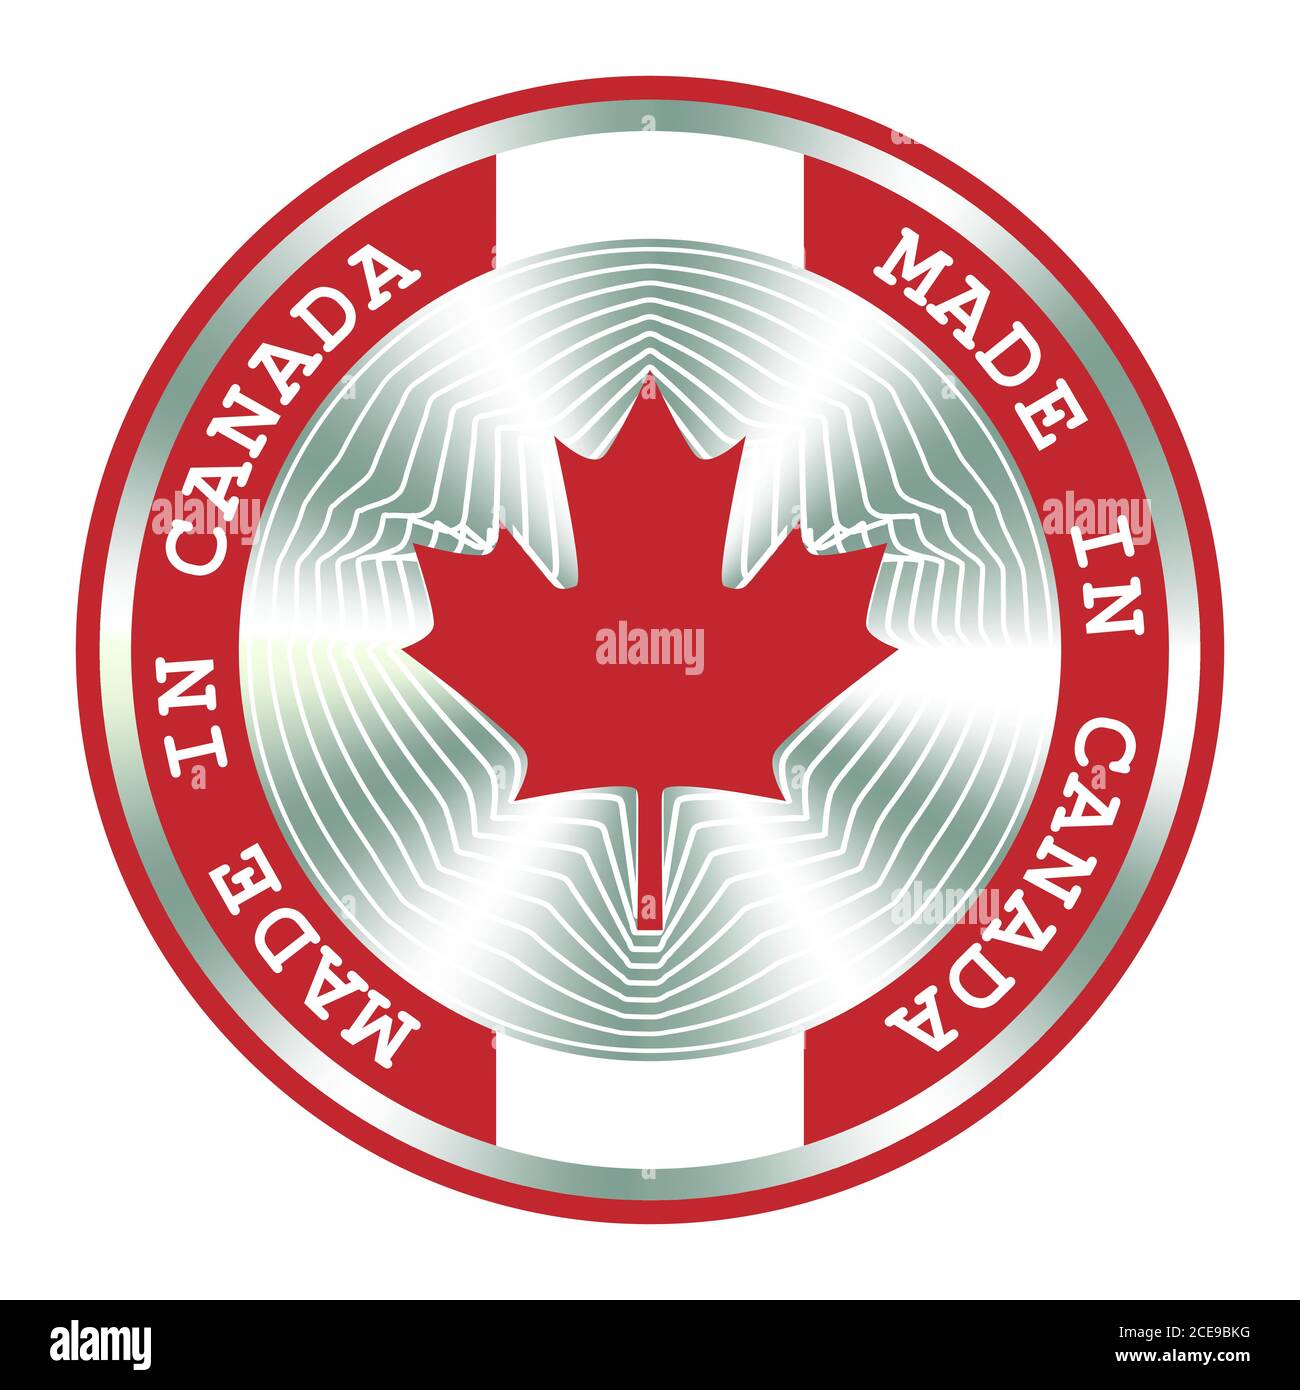 Made in Canada local production sign, sticker, seal, stamp. Round hologram sign for label design and national Canada marketing Stock Vector